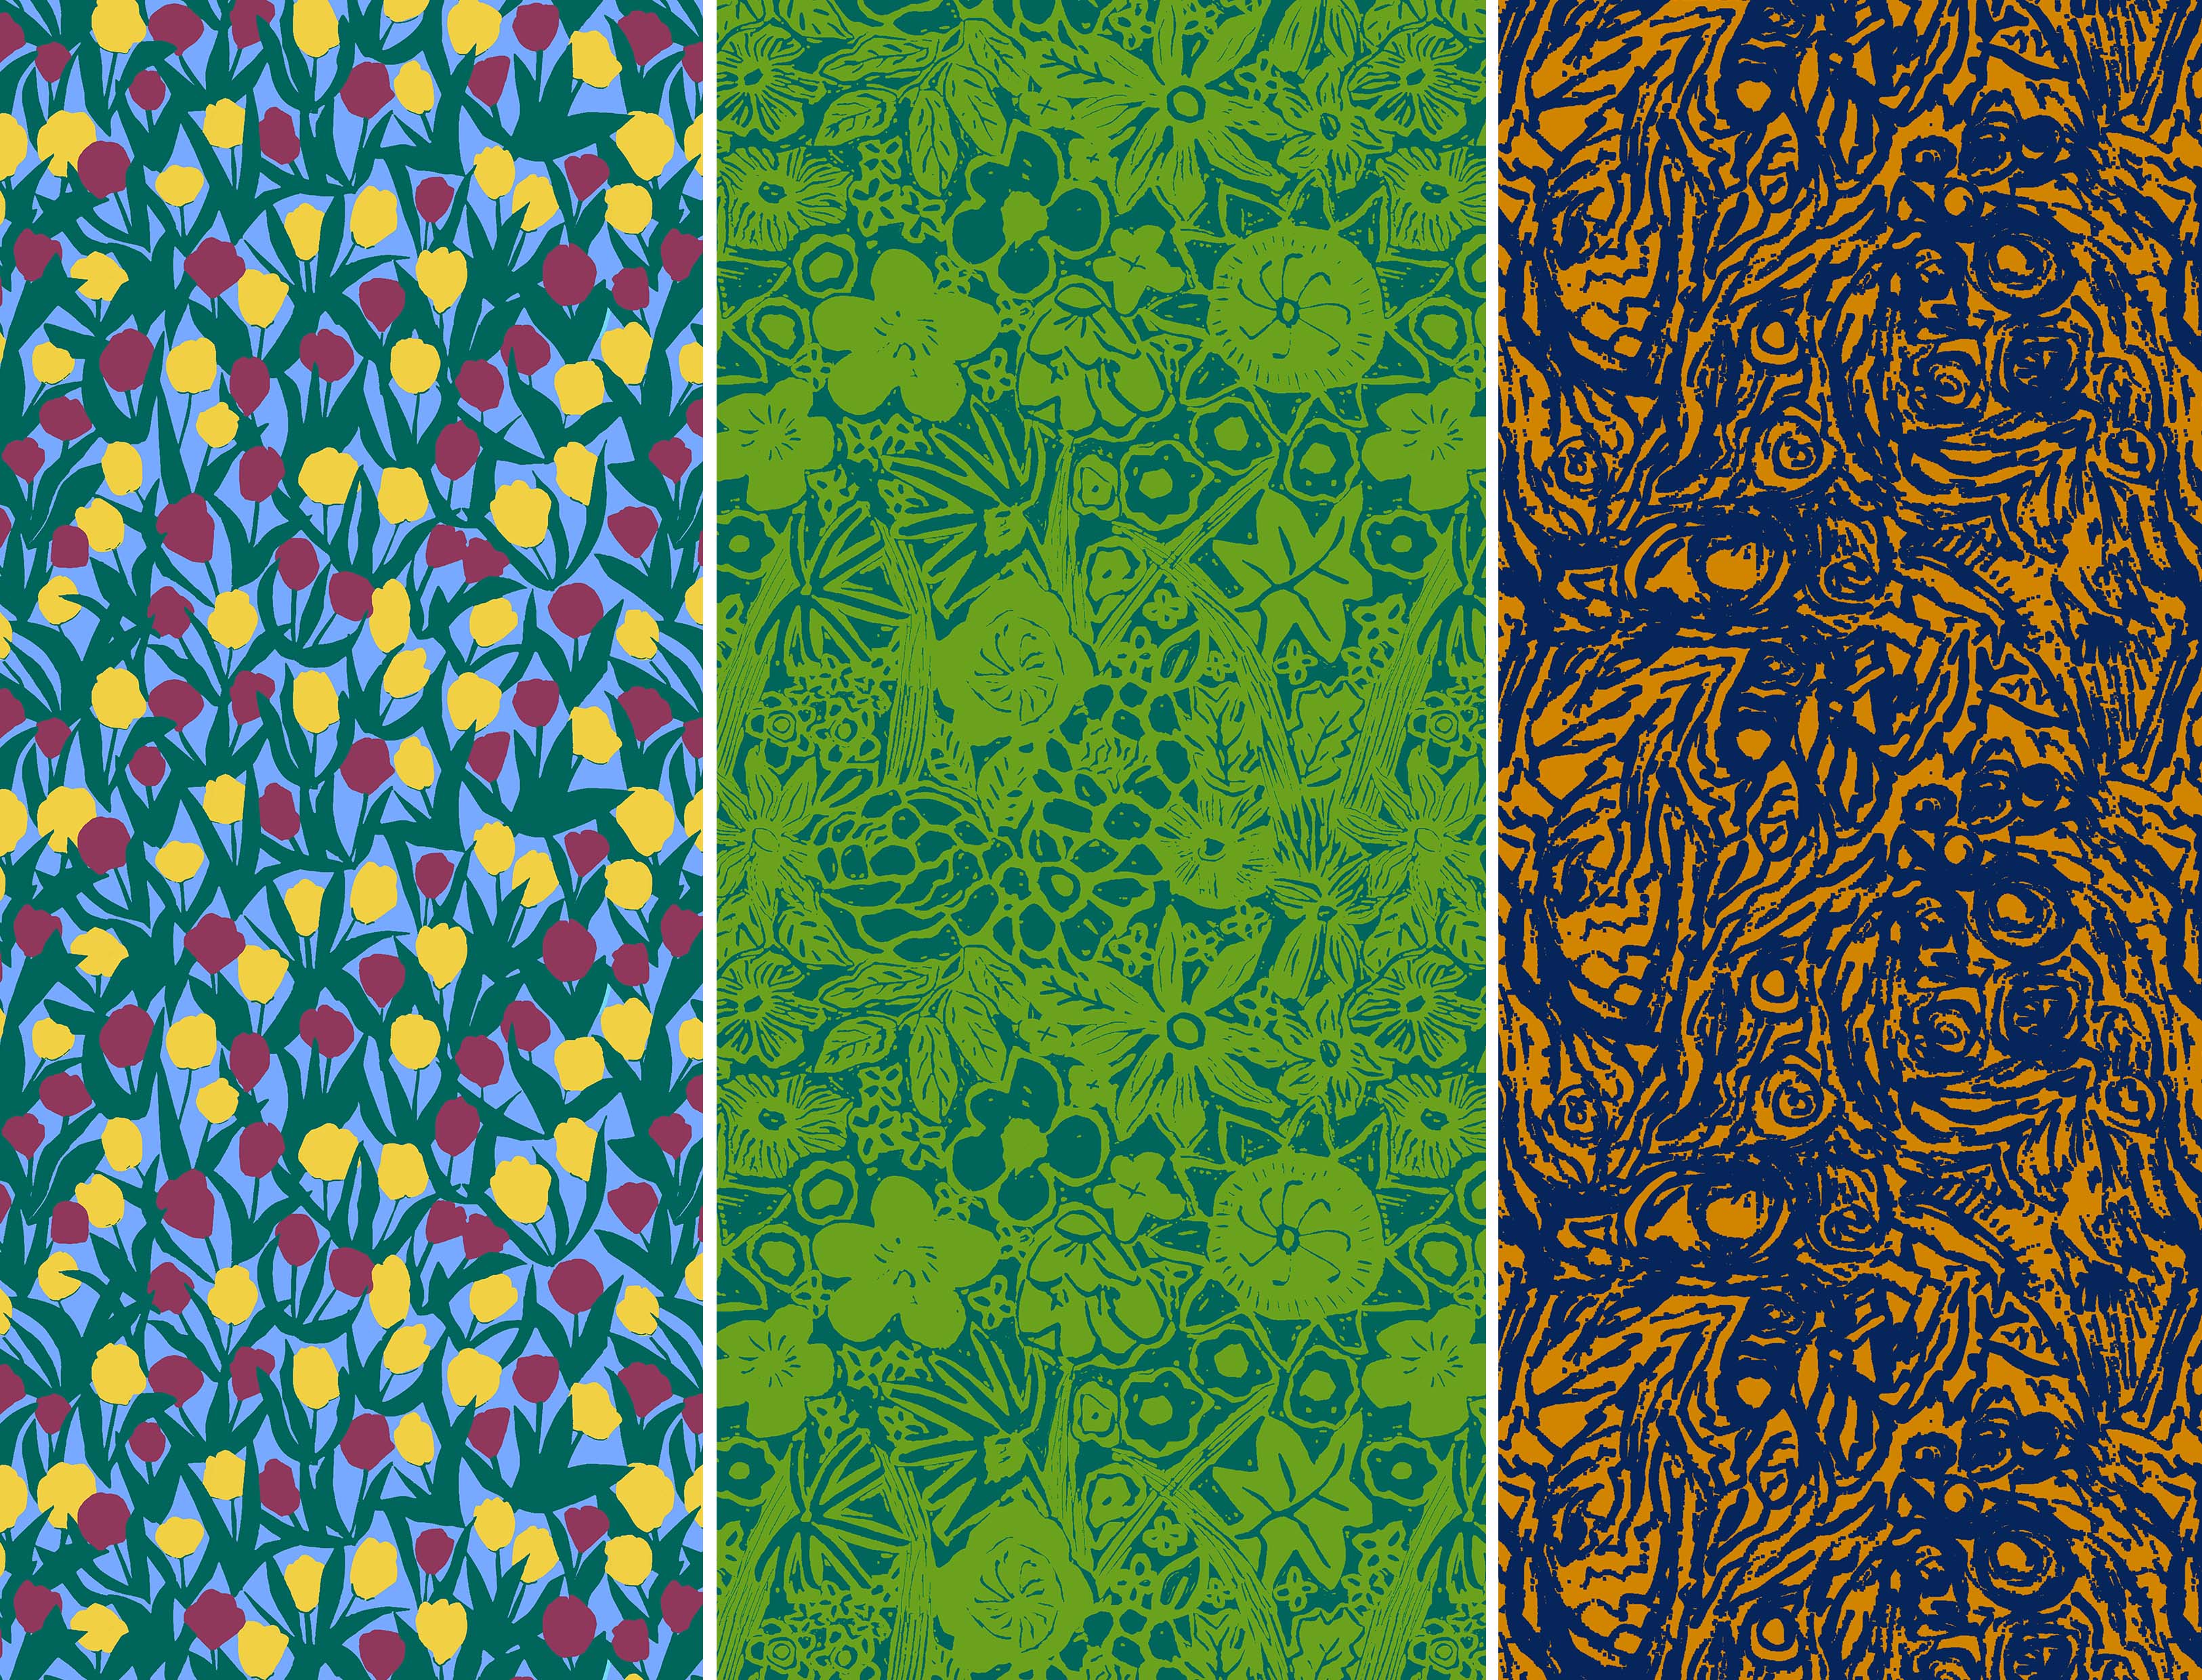 A collection of 3 detailed digital designs by Nieve Merchant inspired by tulips, florals and mahogany.